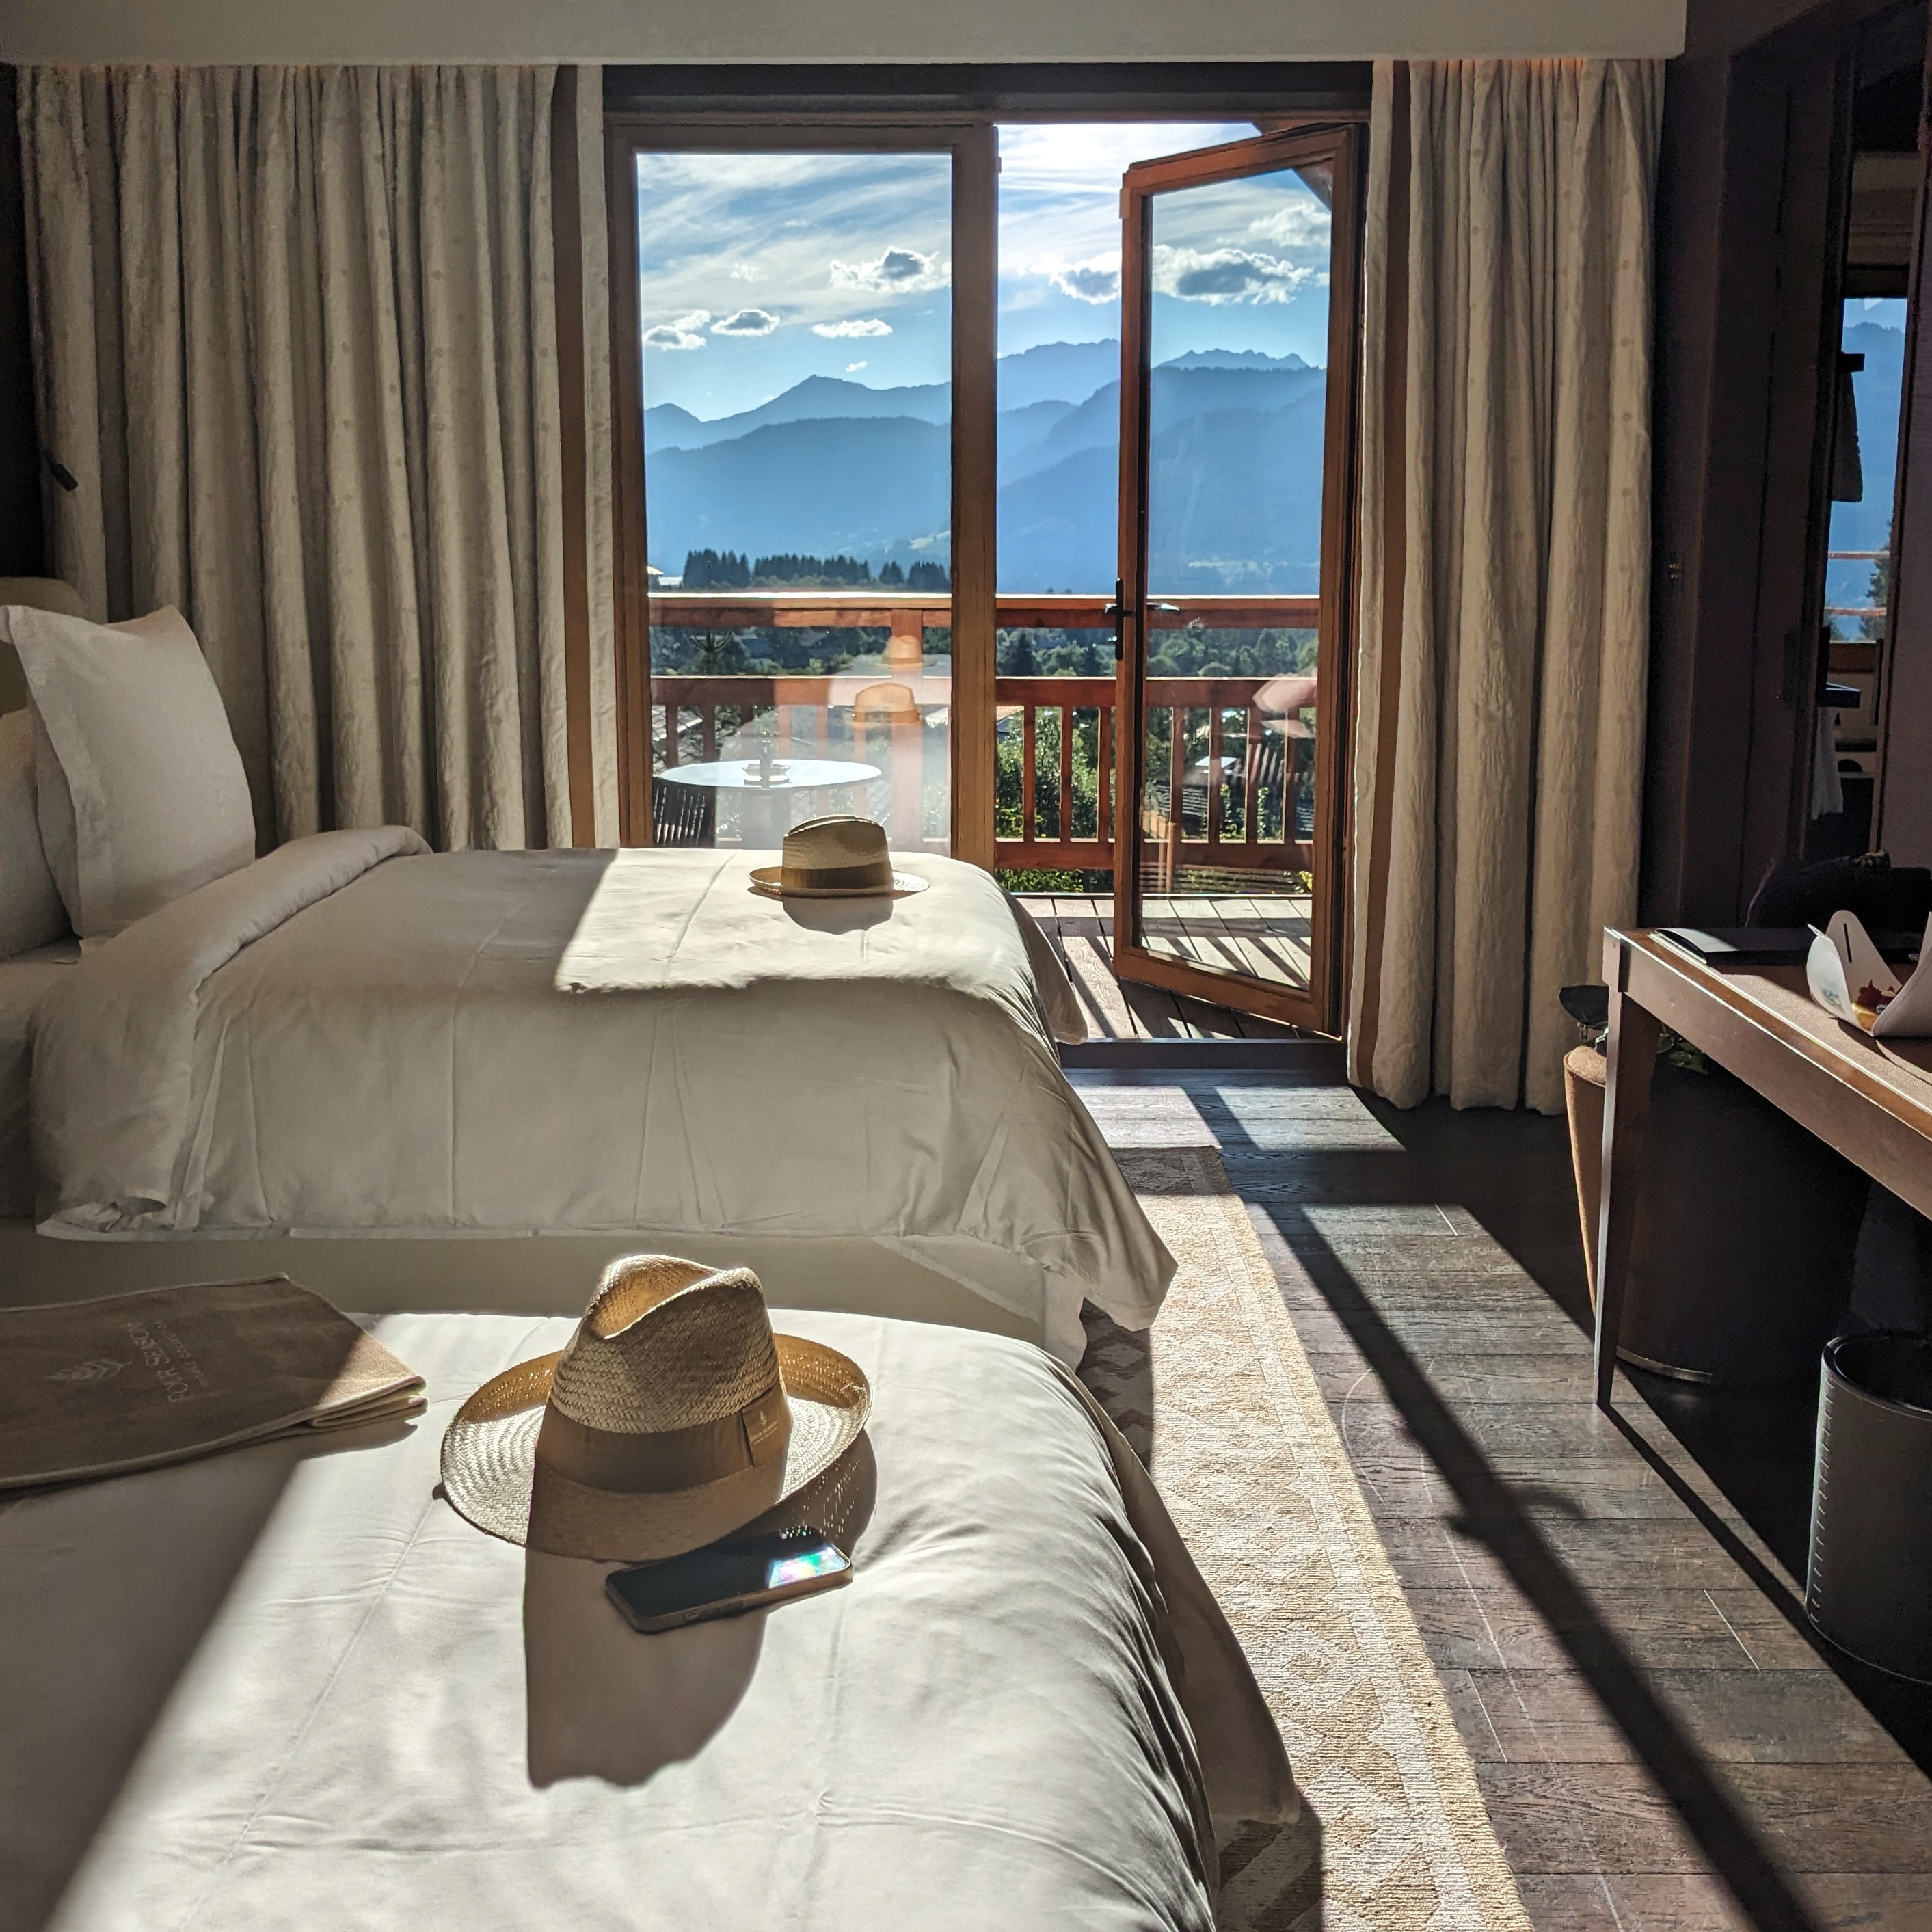 twin beds with panama hats on them in a deluxe twin bedroom at four seasons megeve with stunning mountain views seen through open doors